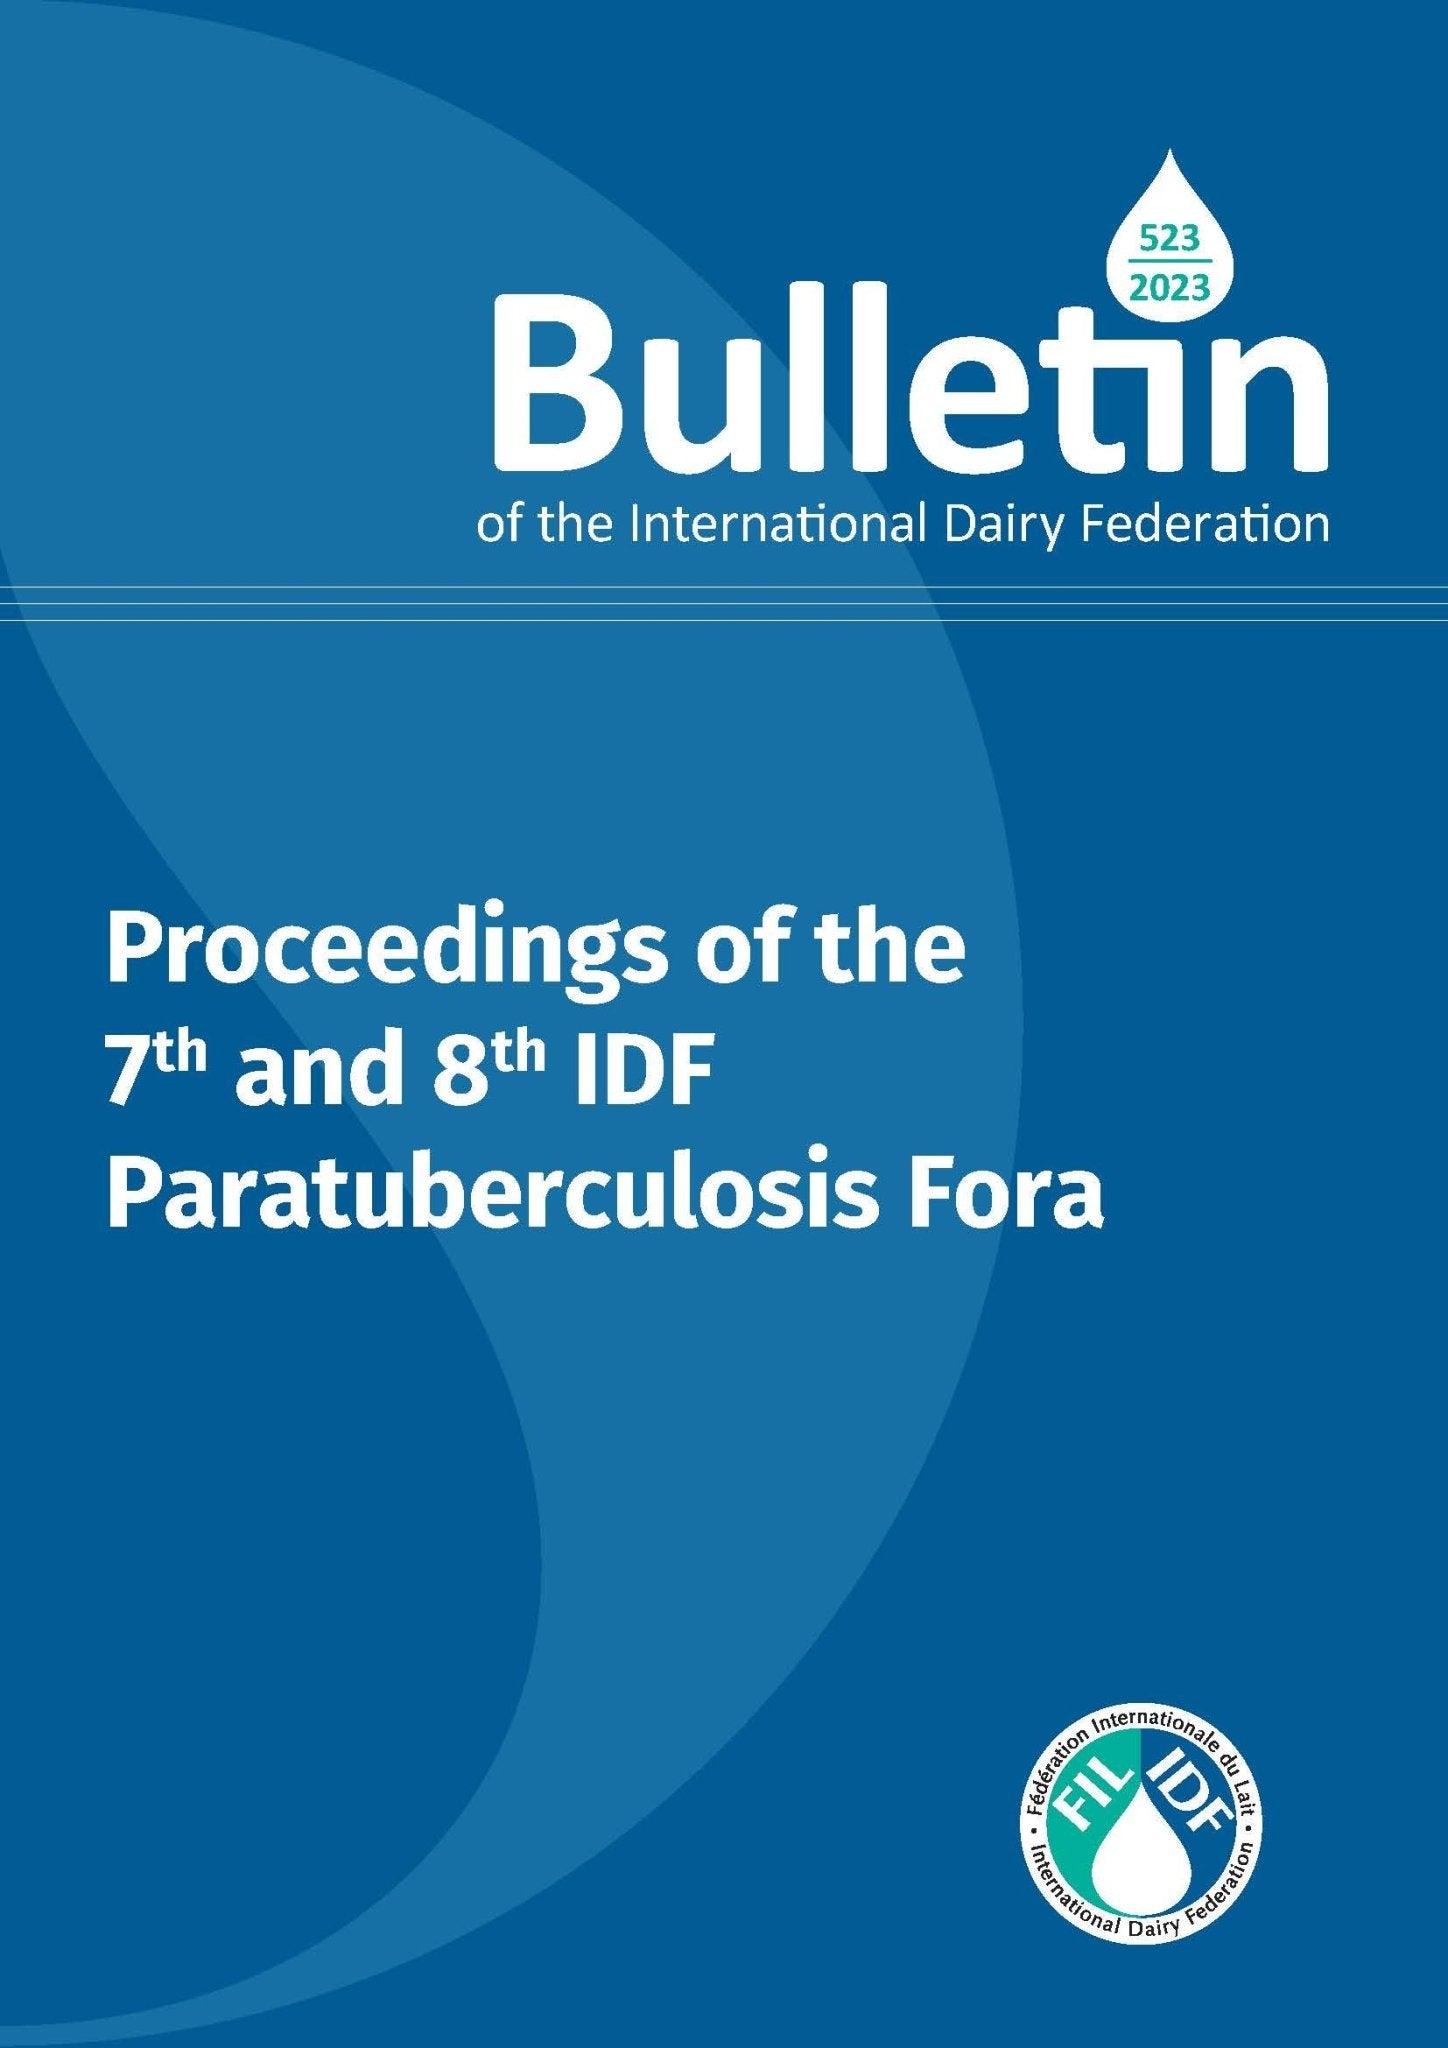 Bulletin of the IDF N°520/2022: The IDF global Carbon Footprint standard  for the dairy sector